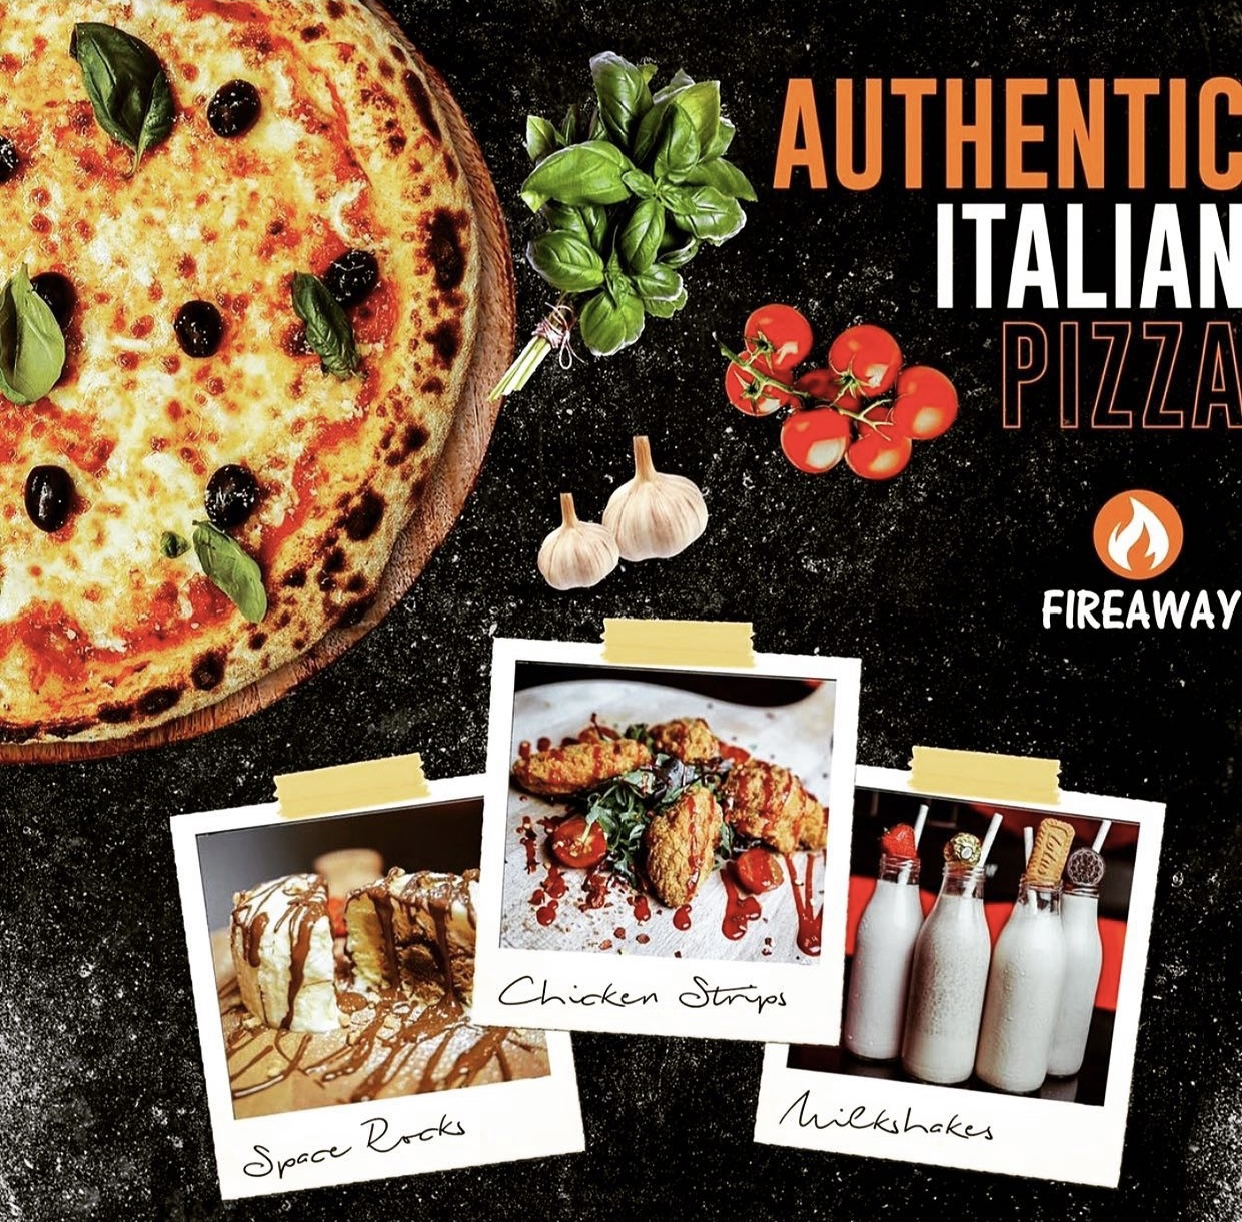 FIREAWAY PIZZA MARGATE - NEW MANAGEMENT